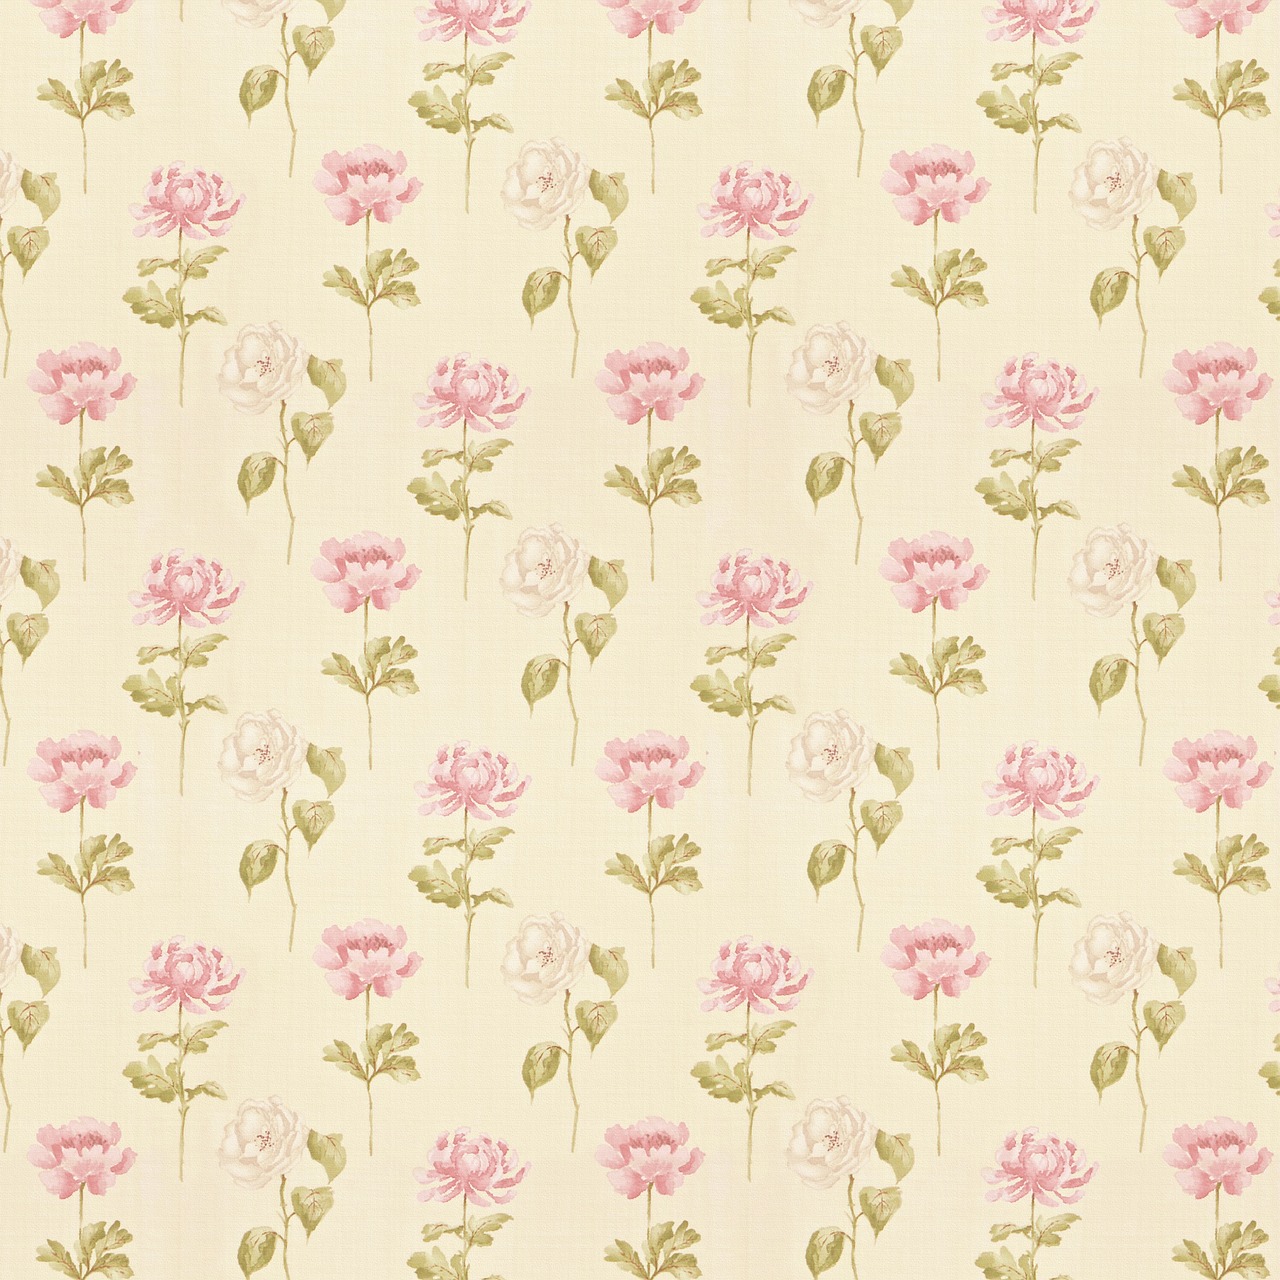 floral paper floral background floral pattern free photo